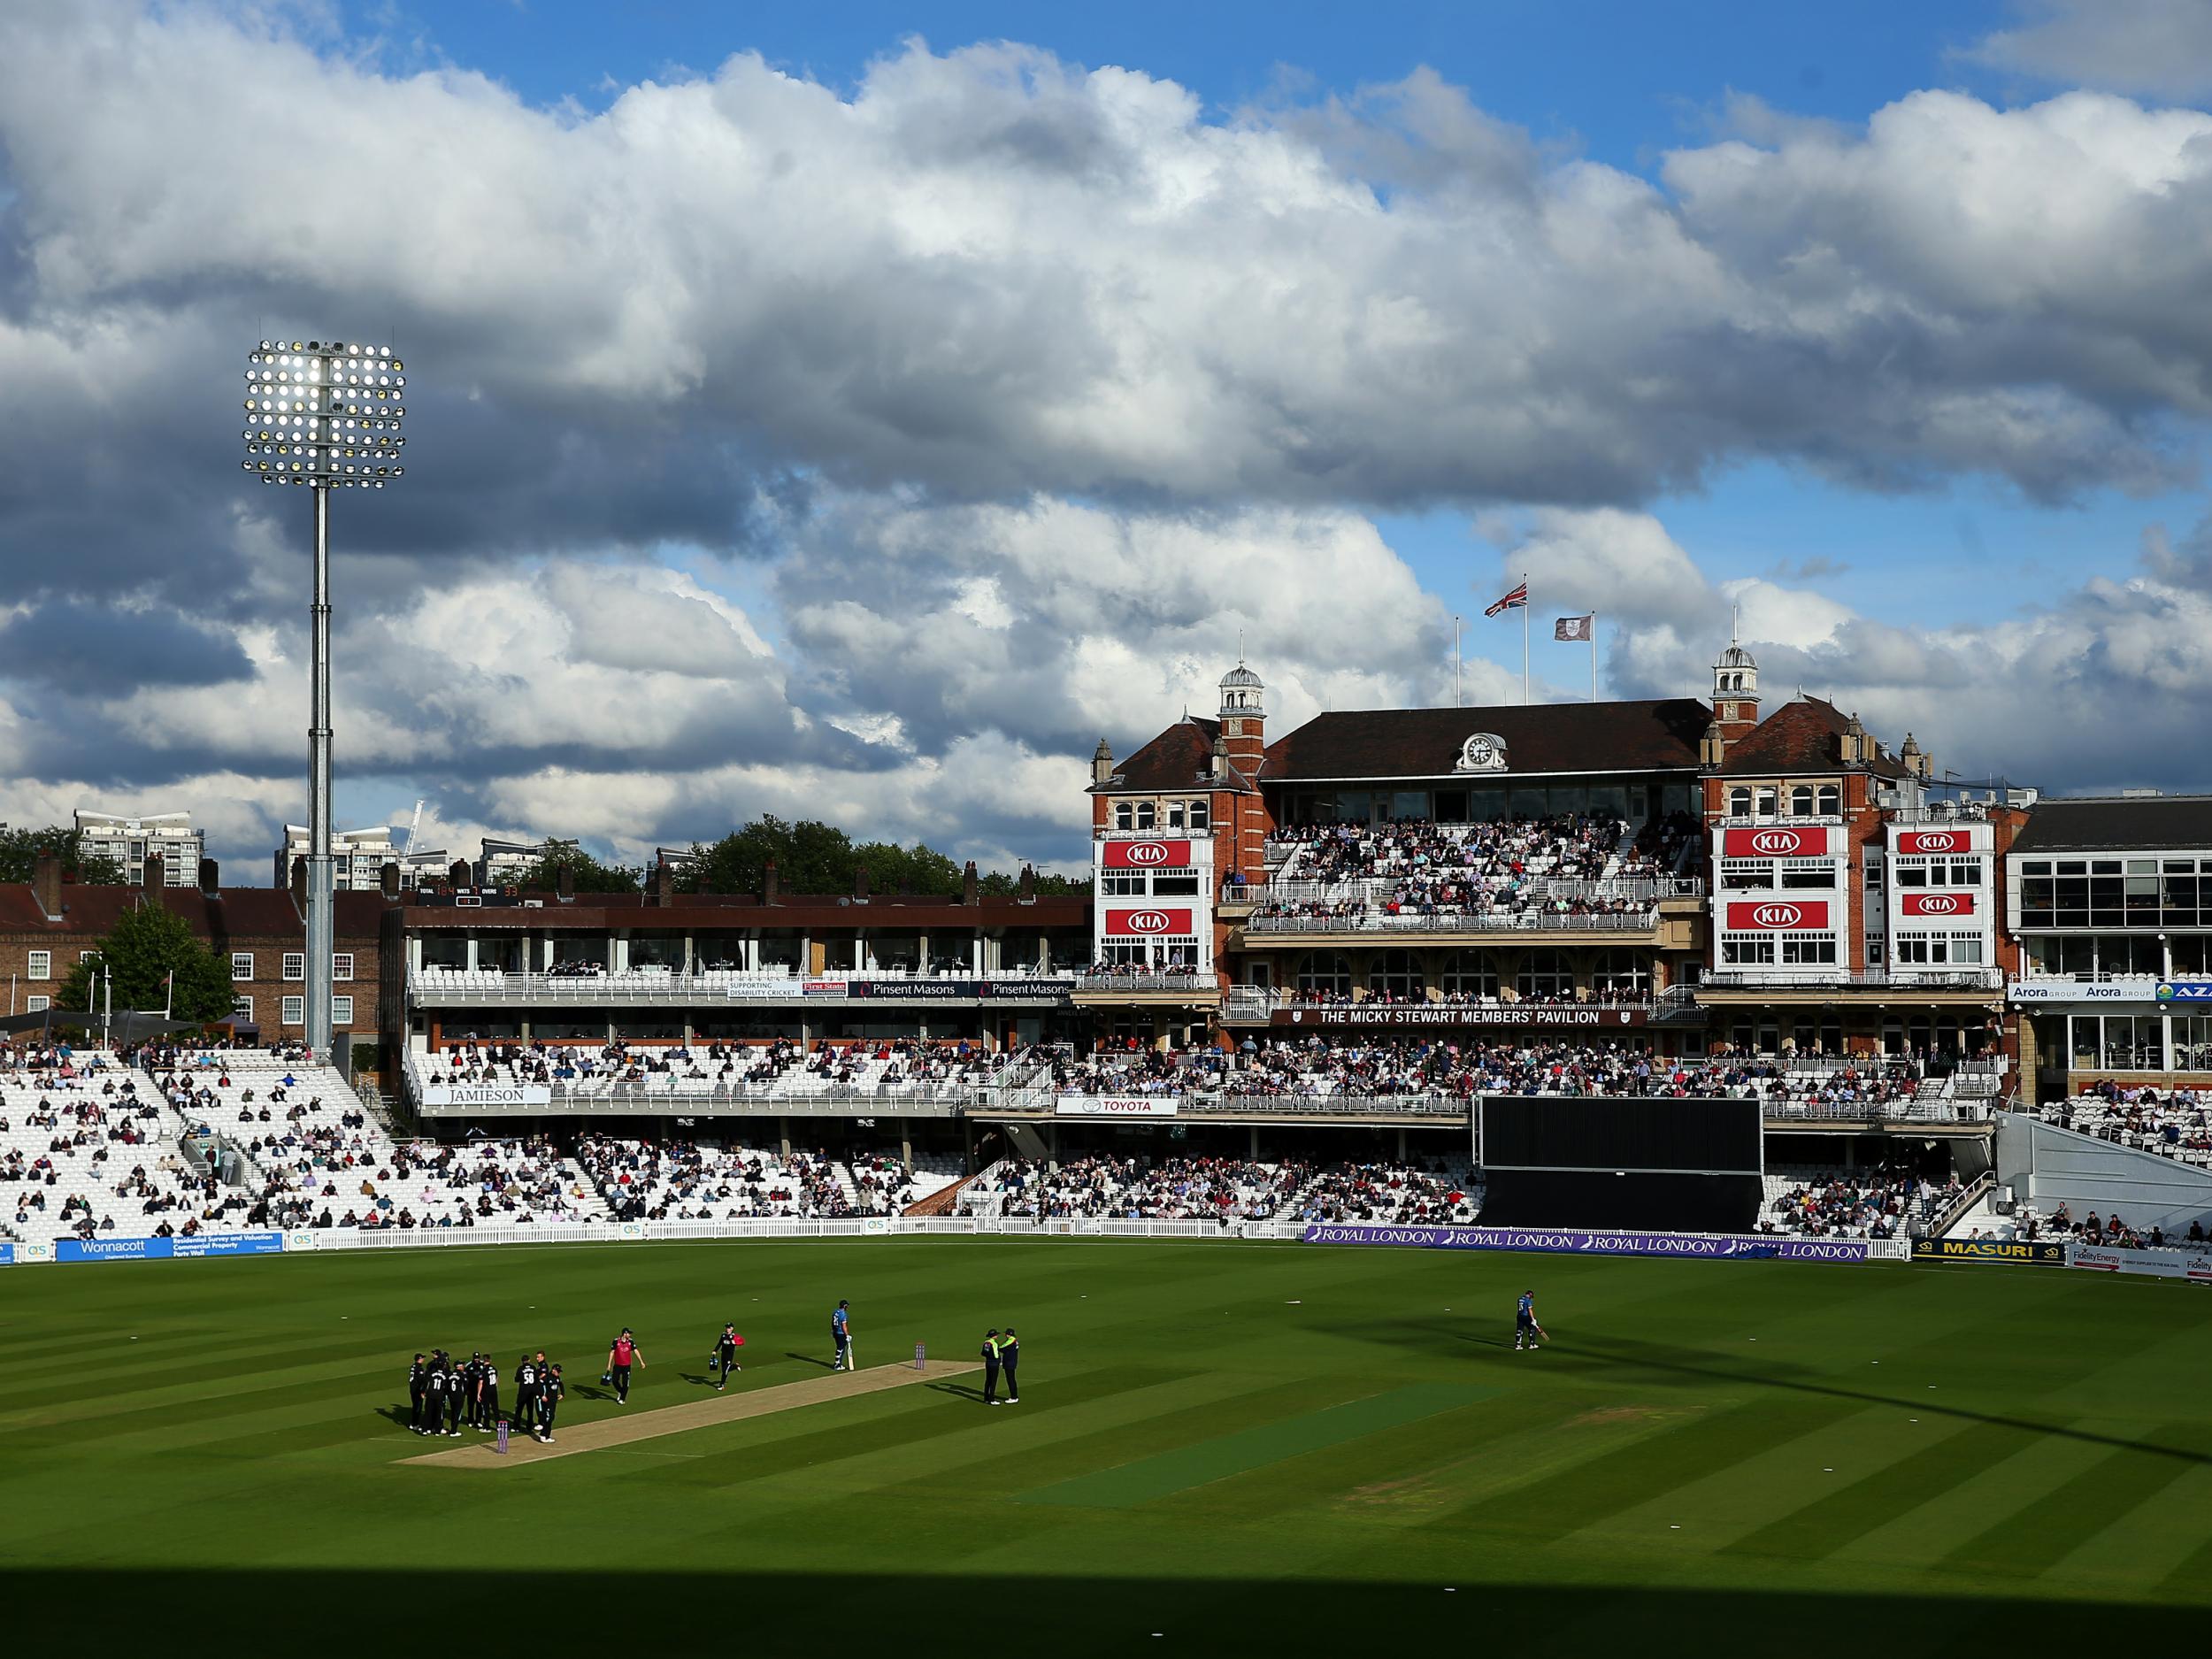 Surrey beat eliminated Kent by 44-runs at The Oval